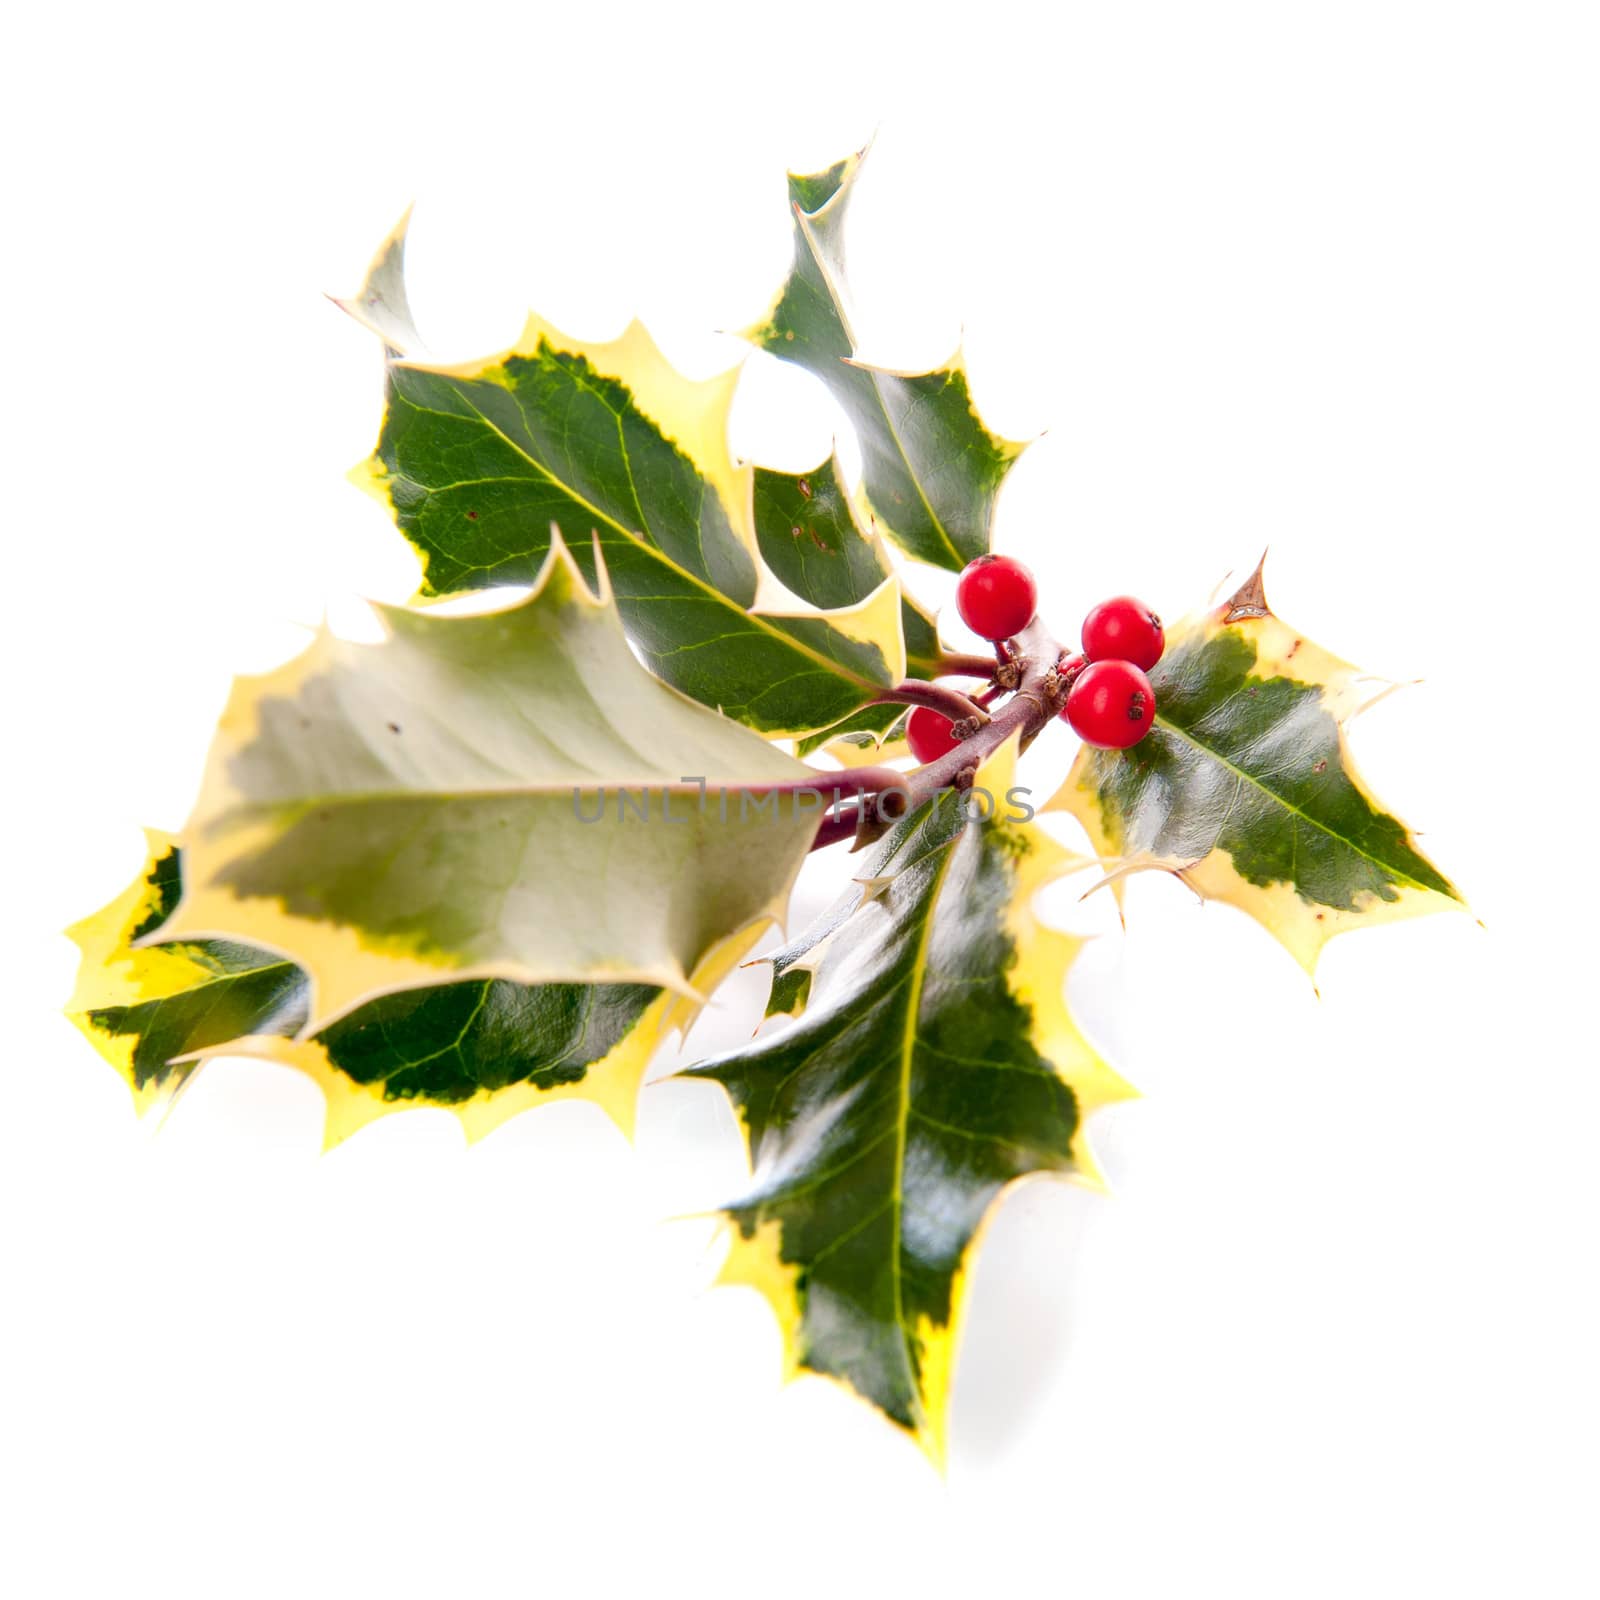 a branch of holly from above, for Christmas, on a white background